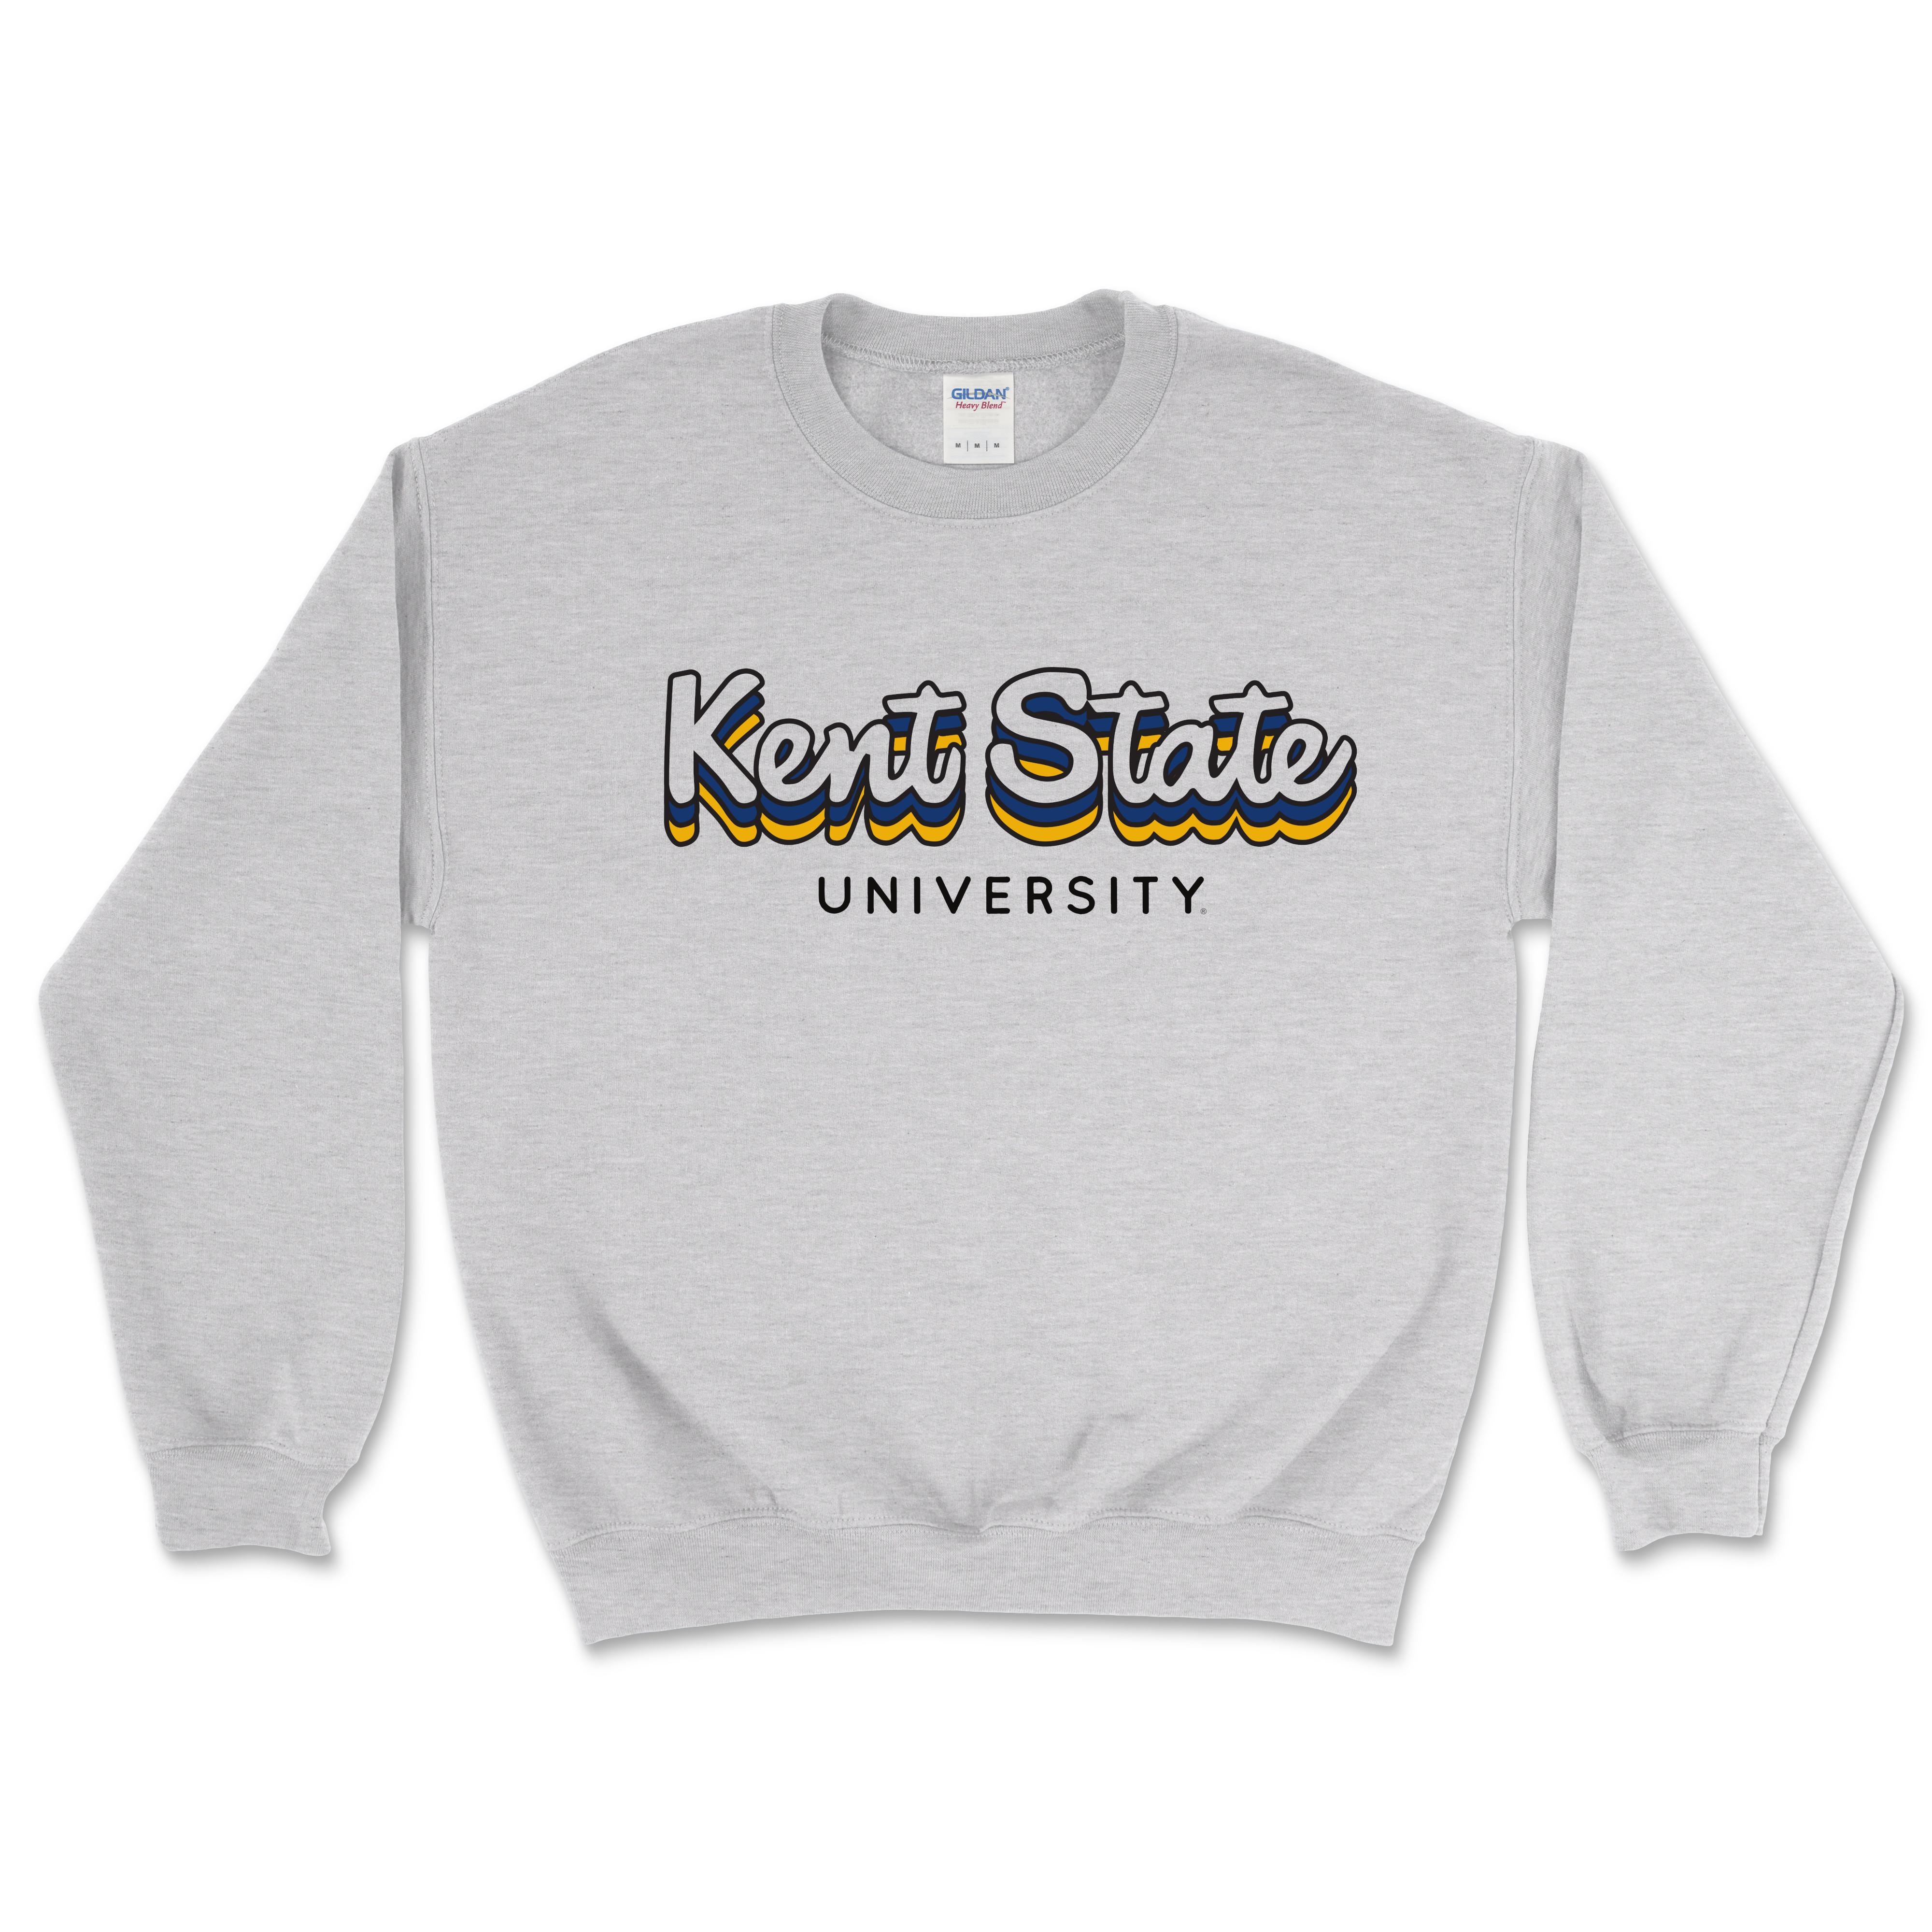 Kent State Light Gray Multi Layers With Color Center Crewneck Sweatshirt